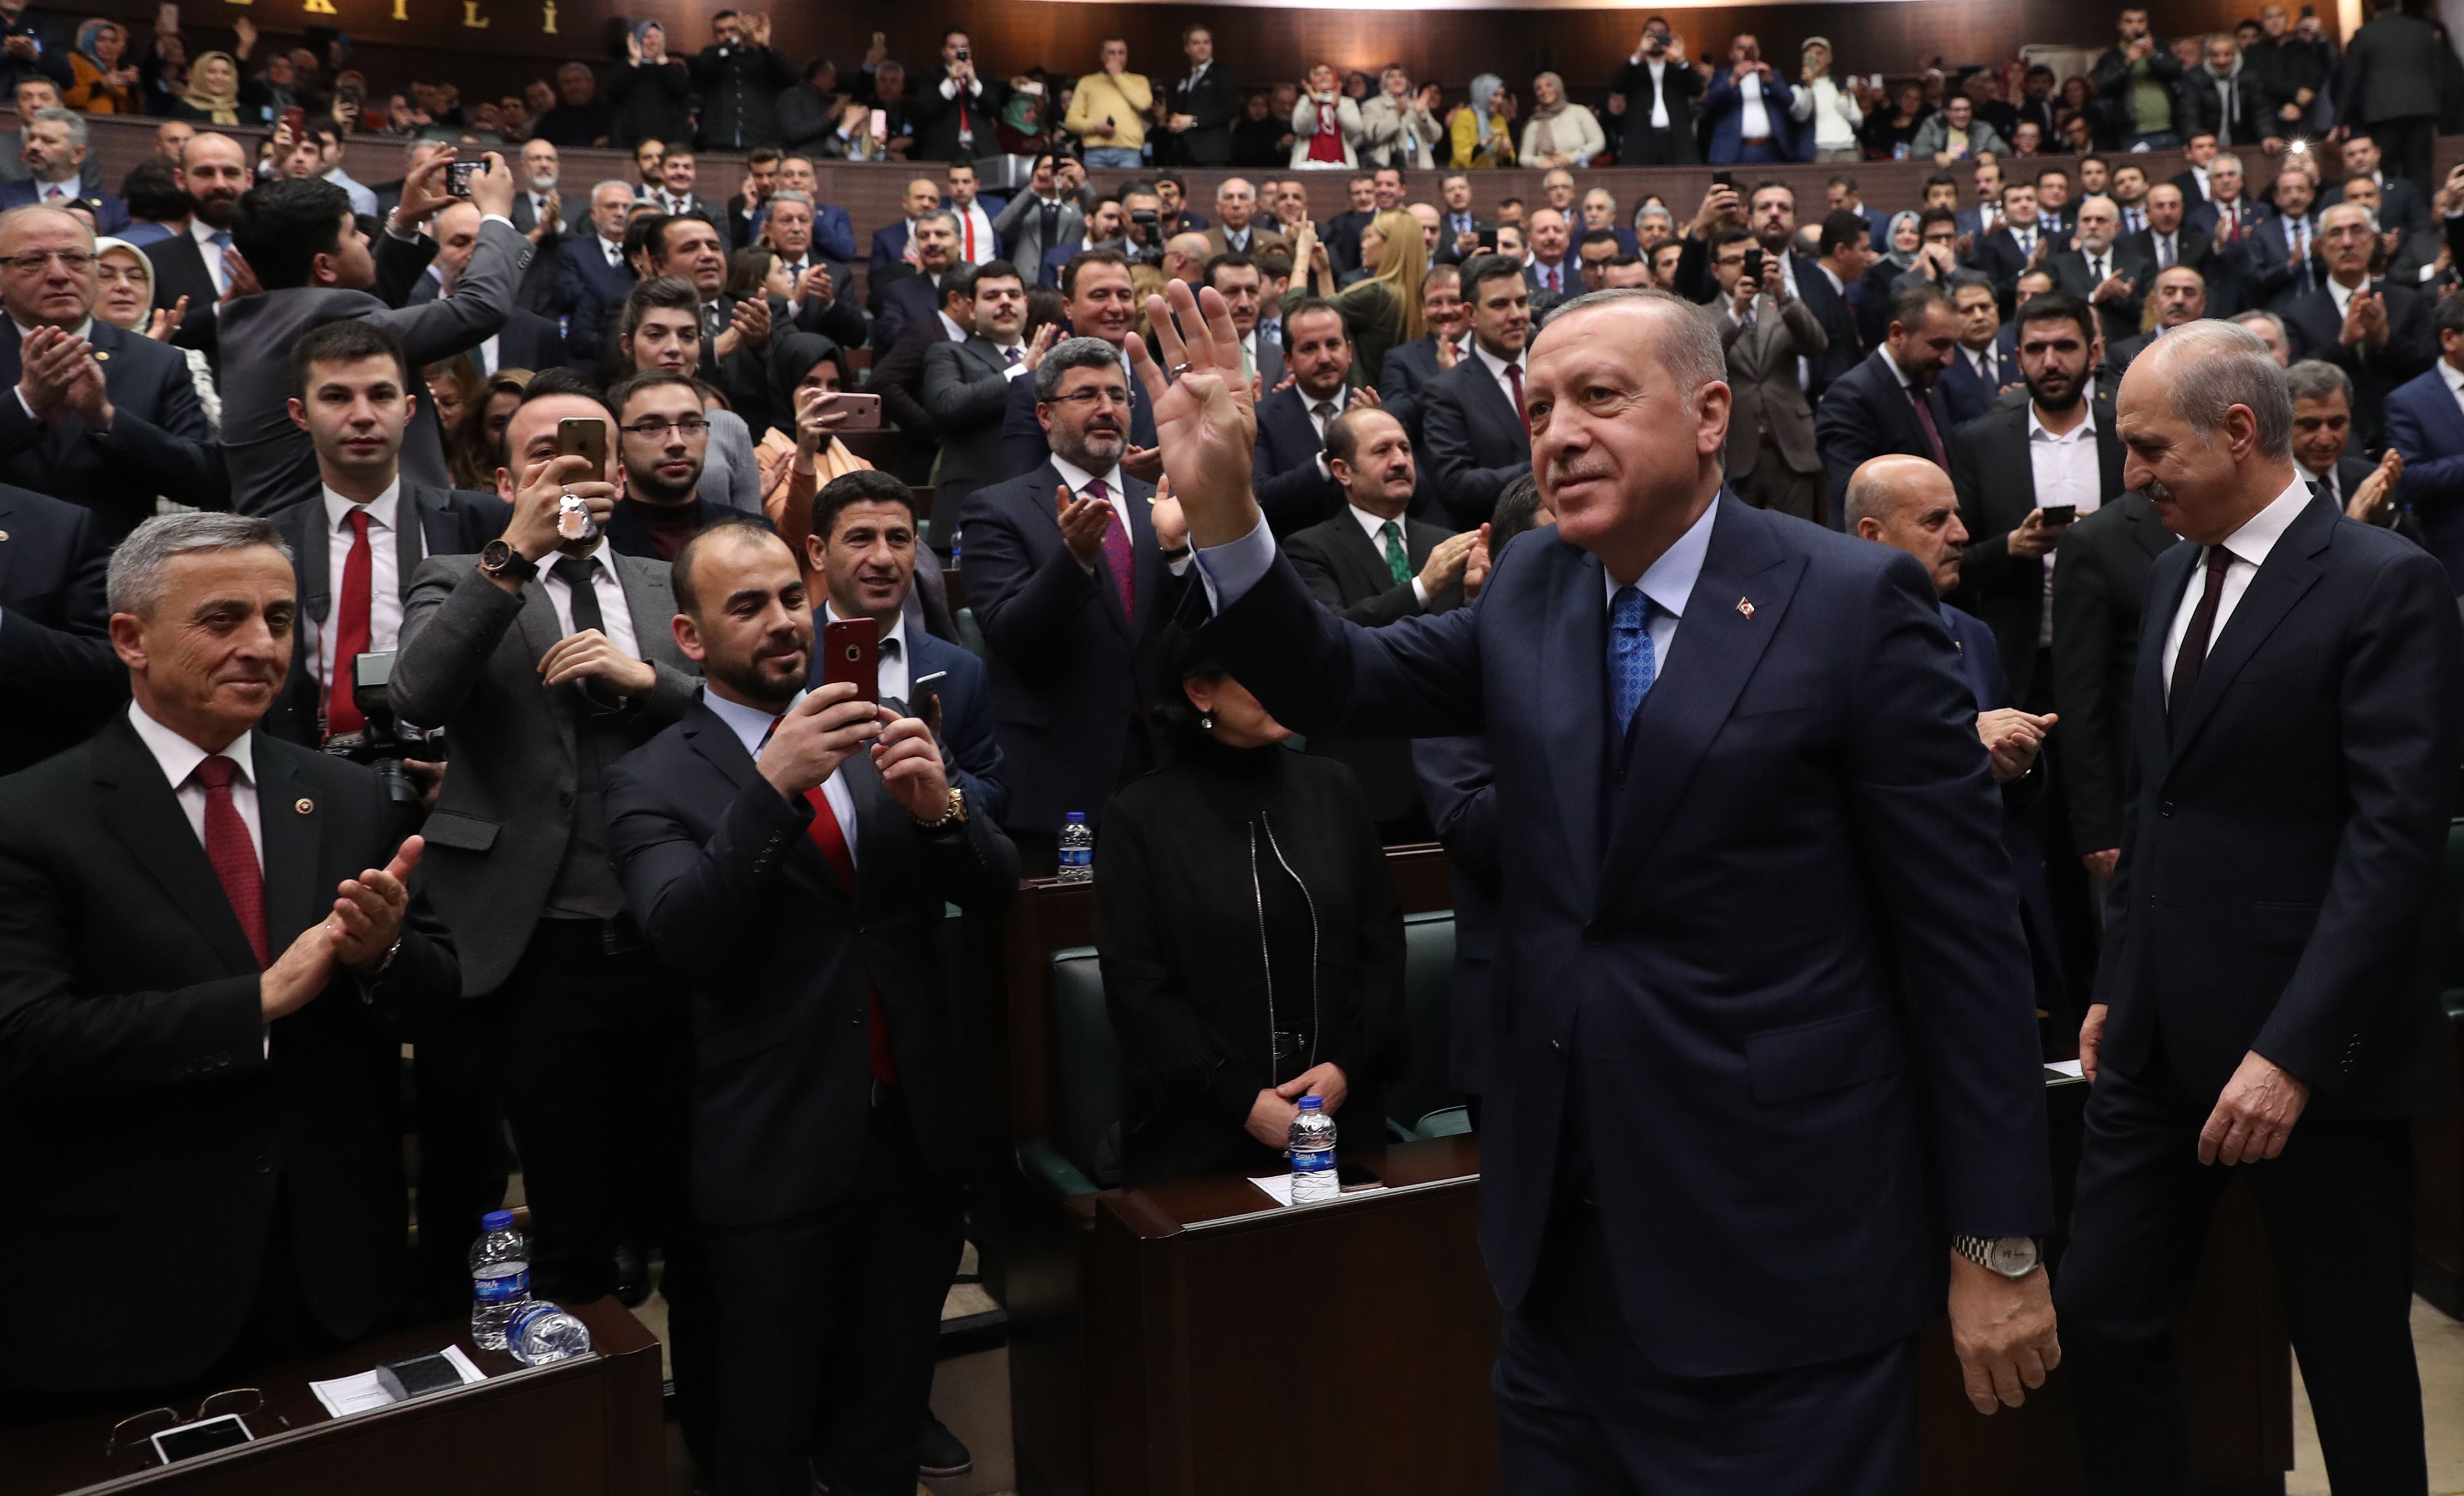 The President of Turkey and leader of Turkey's ruling Justice and Development (AK) Party Recep Tayyip Erdogan gestures to his supporters during his party's parliamentary group meeting at the Grand National Assembly of Turkey in Ankara, on December 25, 2018. (Photo by Adem ALTAN / AFP)